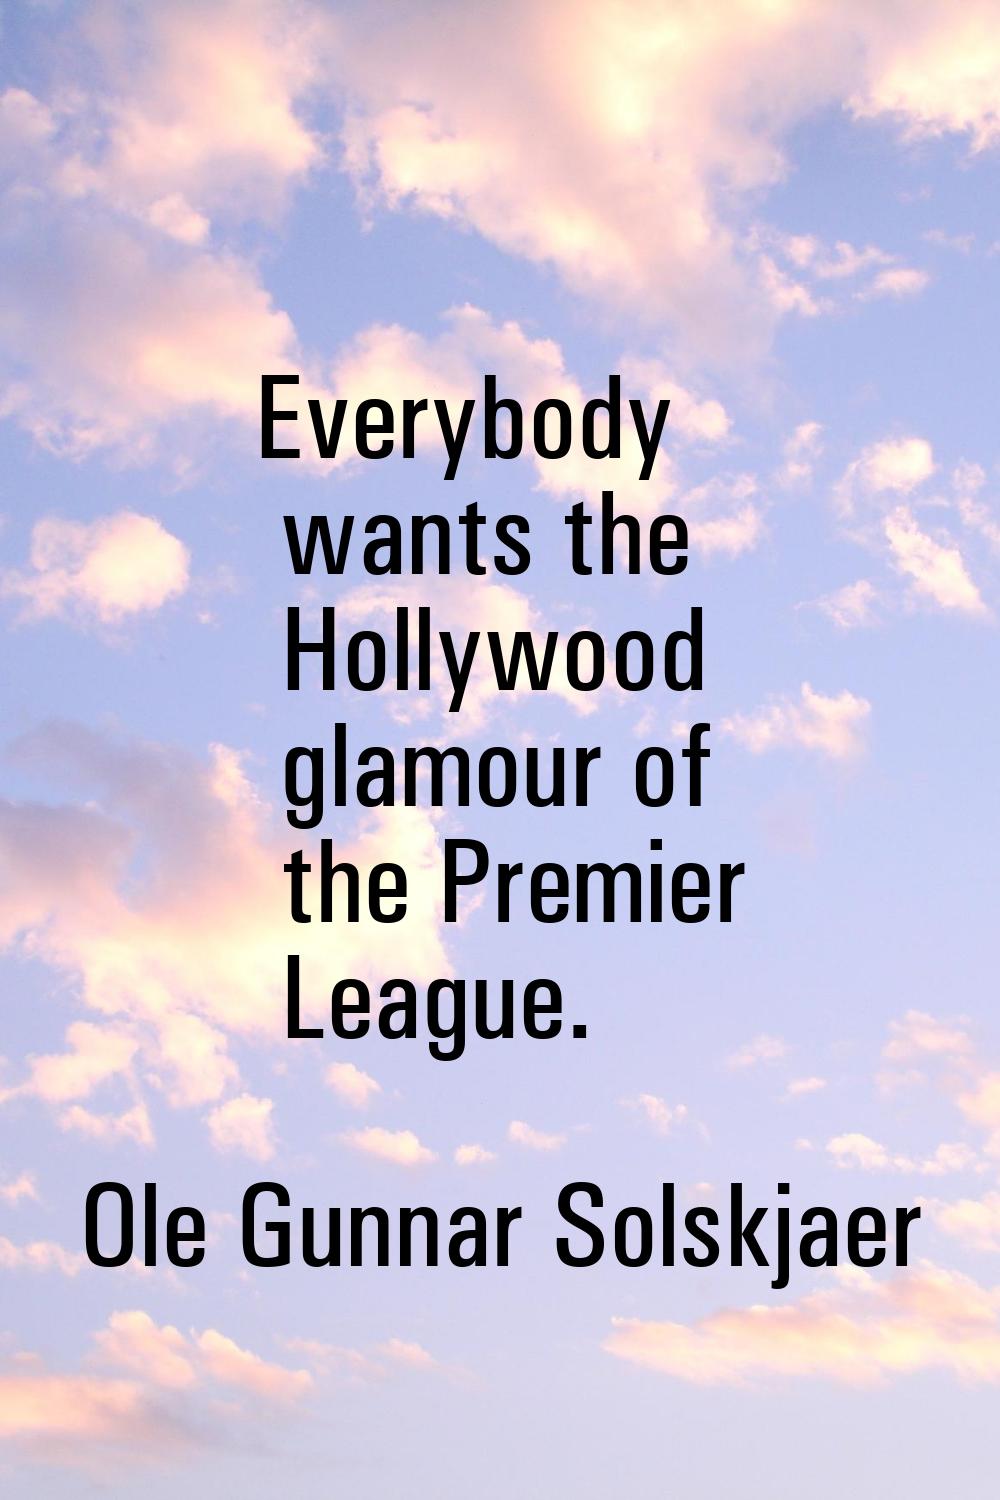 Everybody wants the Hollywood glamour of the Premier League.